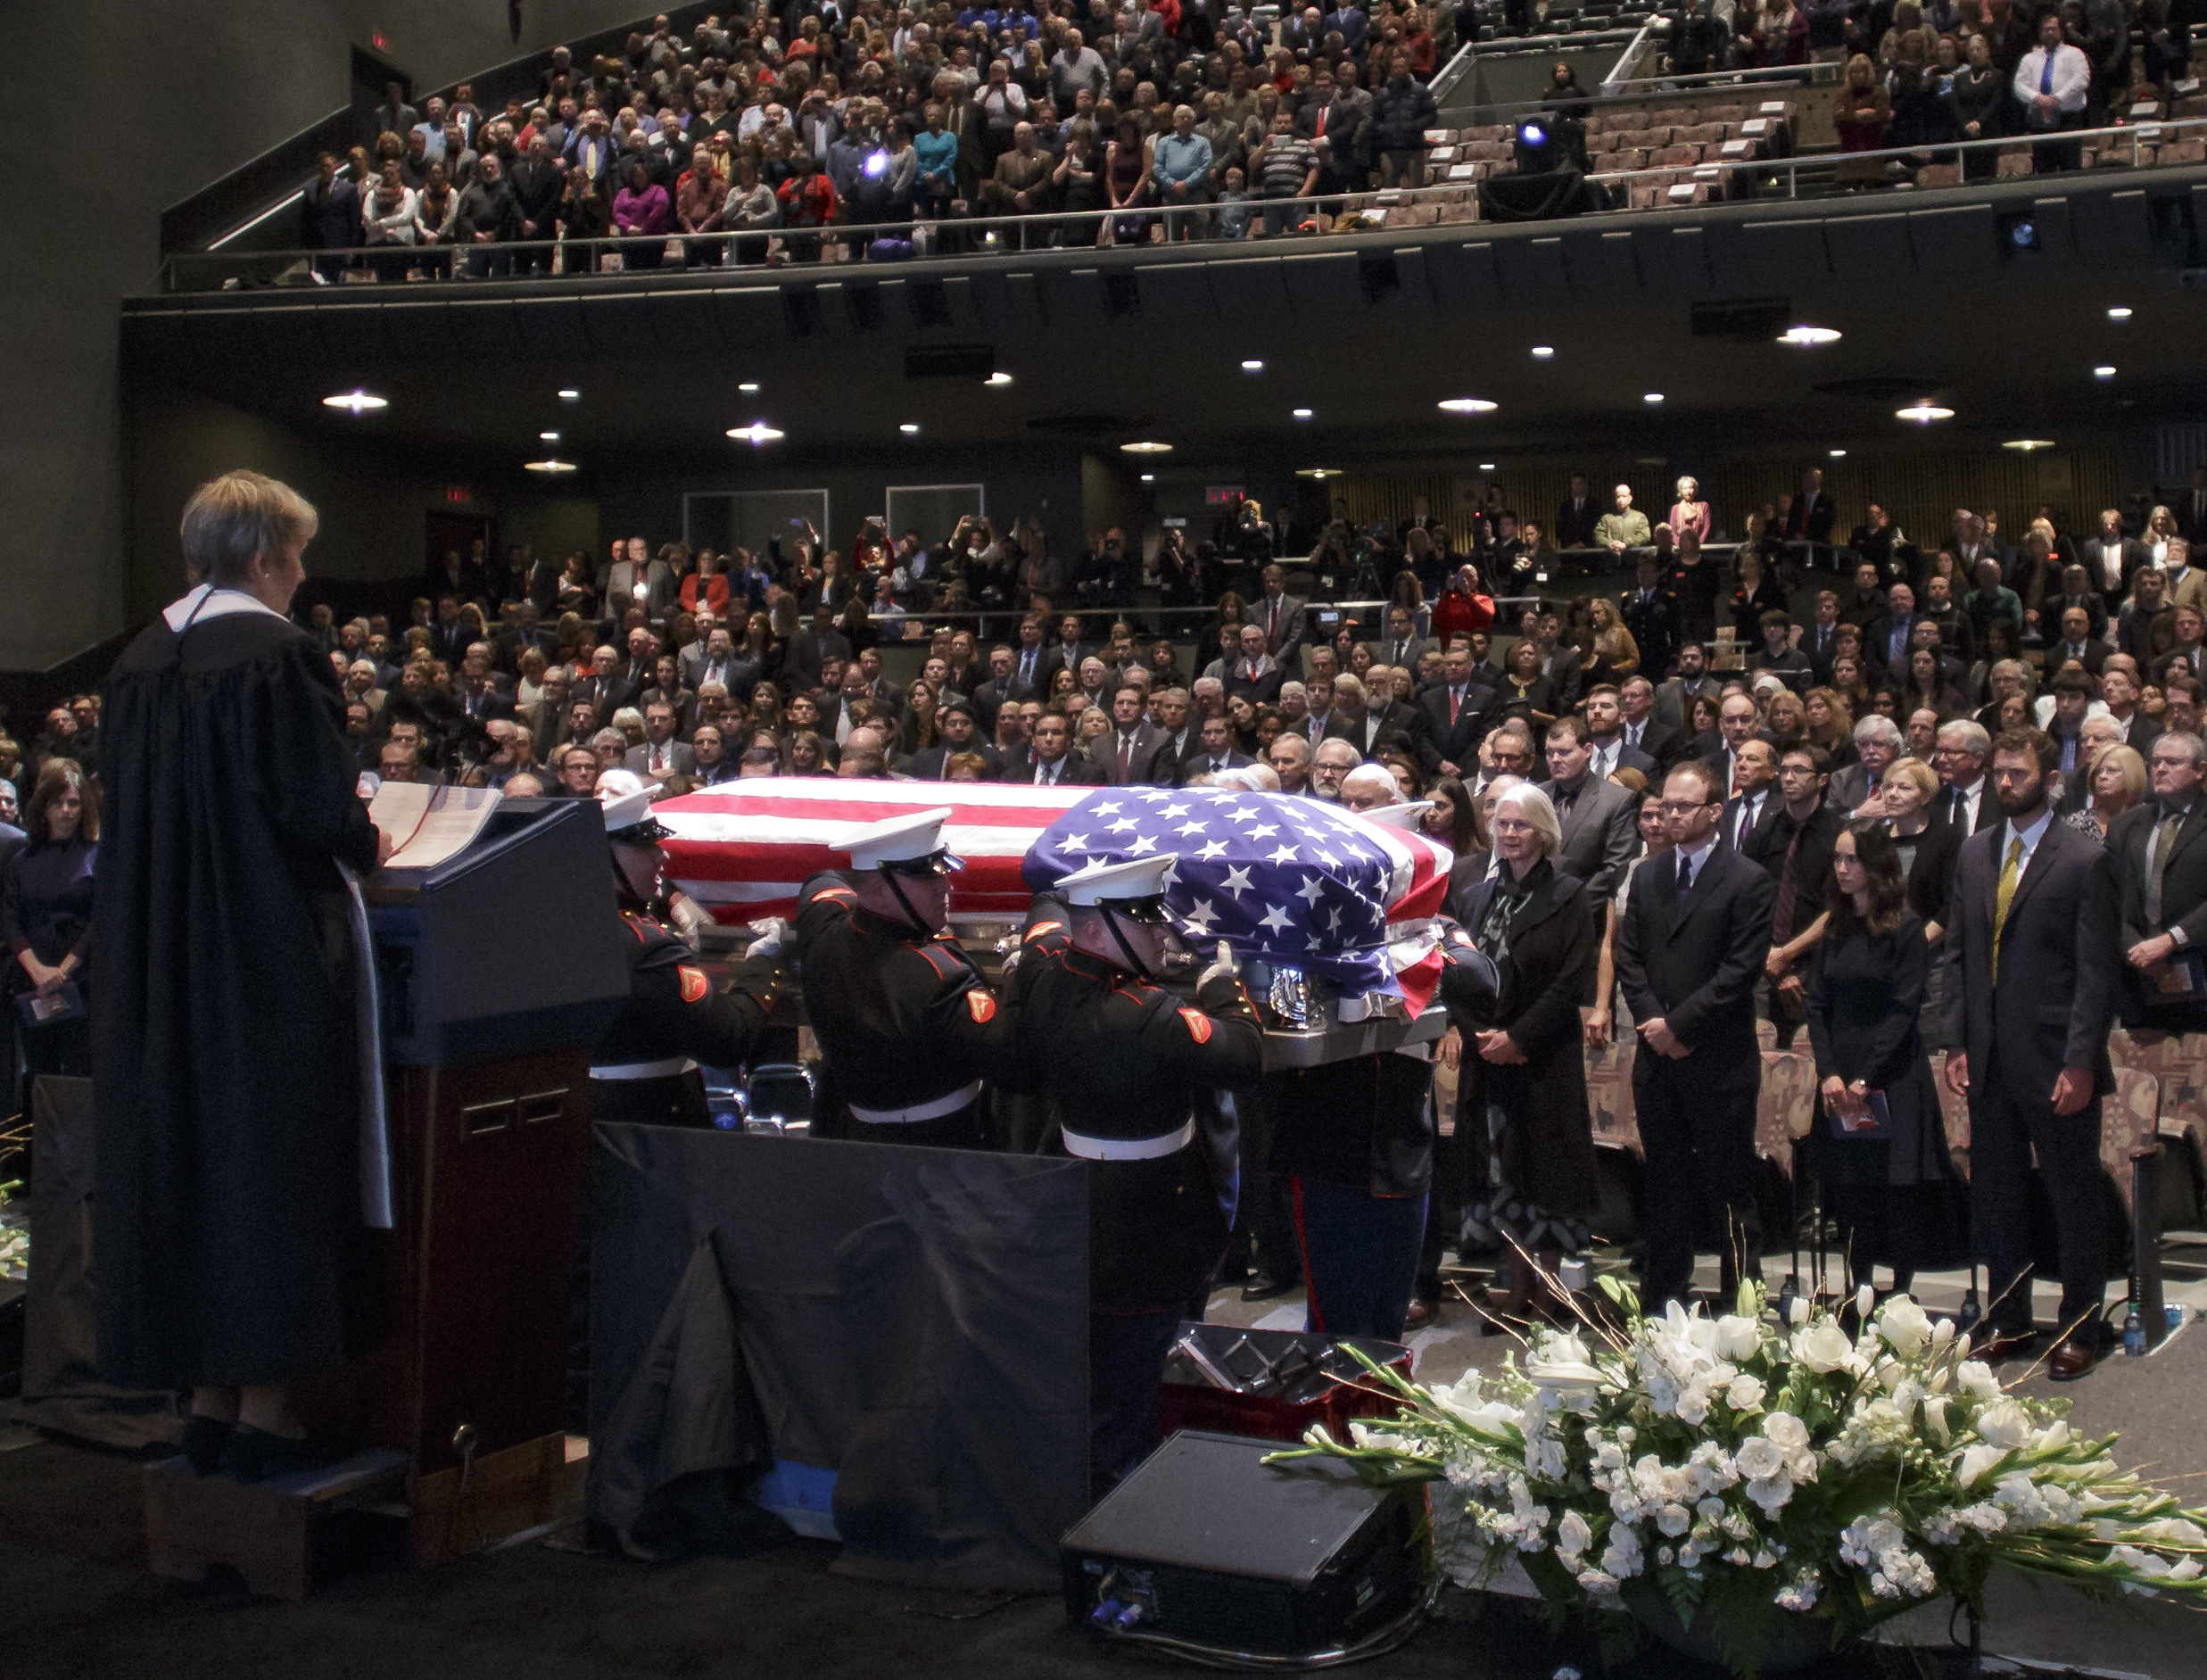 In this handout provided by the National Aeronautics and Space Administration (NASA), Marines, from Marine Barracks Washington, carry in the casket of former astronaut and U.S. Senator John Glenn during a ceremony to celebrate his life, Saturday, December 17, 2016 at The Ohio State University, Mershon Auditorium in Columbus, Ohio. Glenn, who died at age 95, was the first American to orbit the Earth. He will be honored in a memorial service at Ohio State University's Mershon Auditorium. (Photo by Bill Ingalls/NASA via Getty Images)